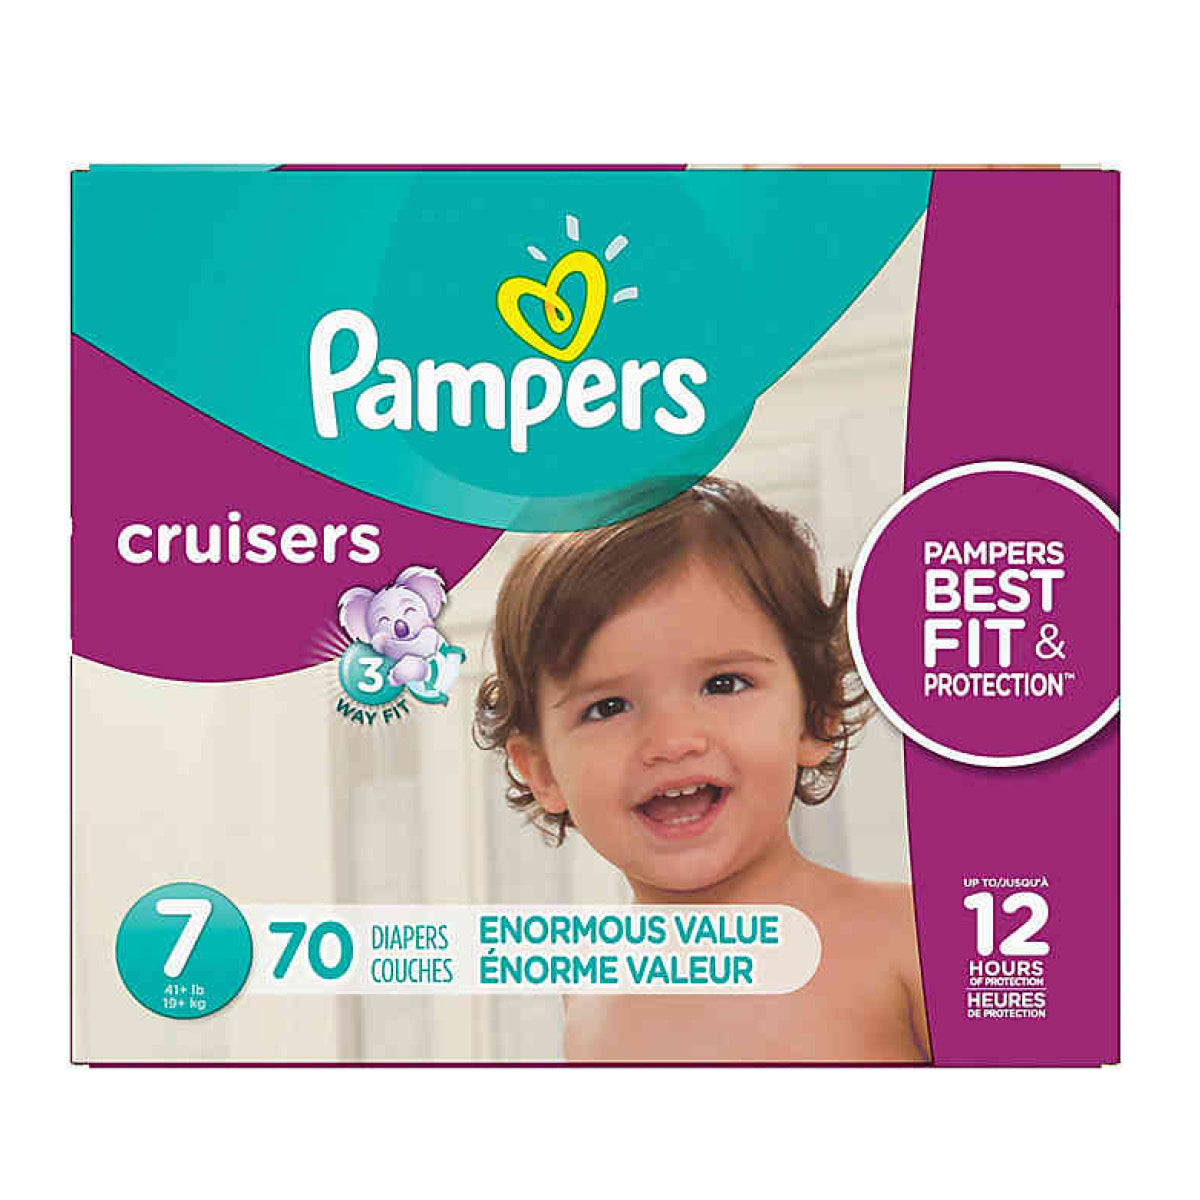 Pampers Cruisers Diapers Size 7, 44pk